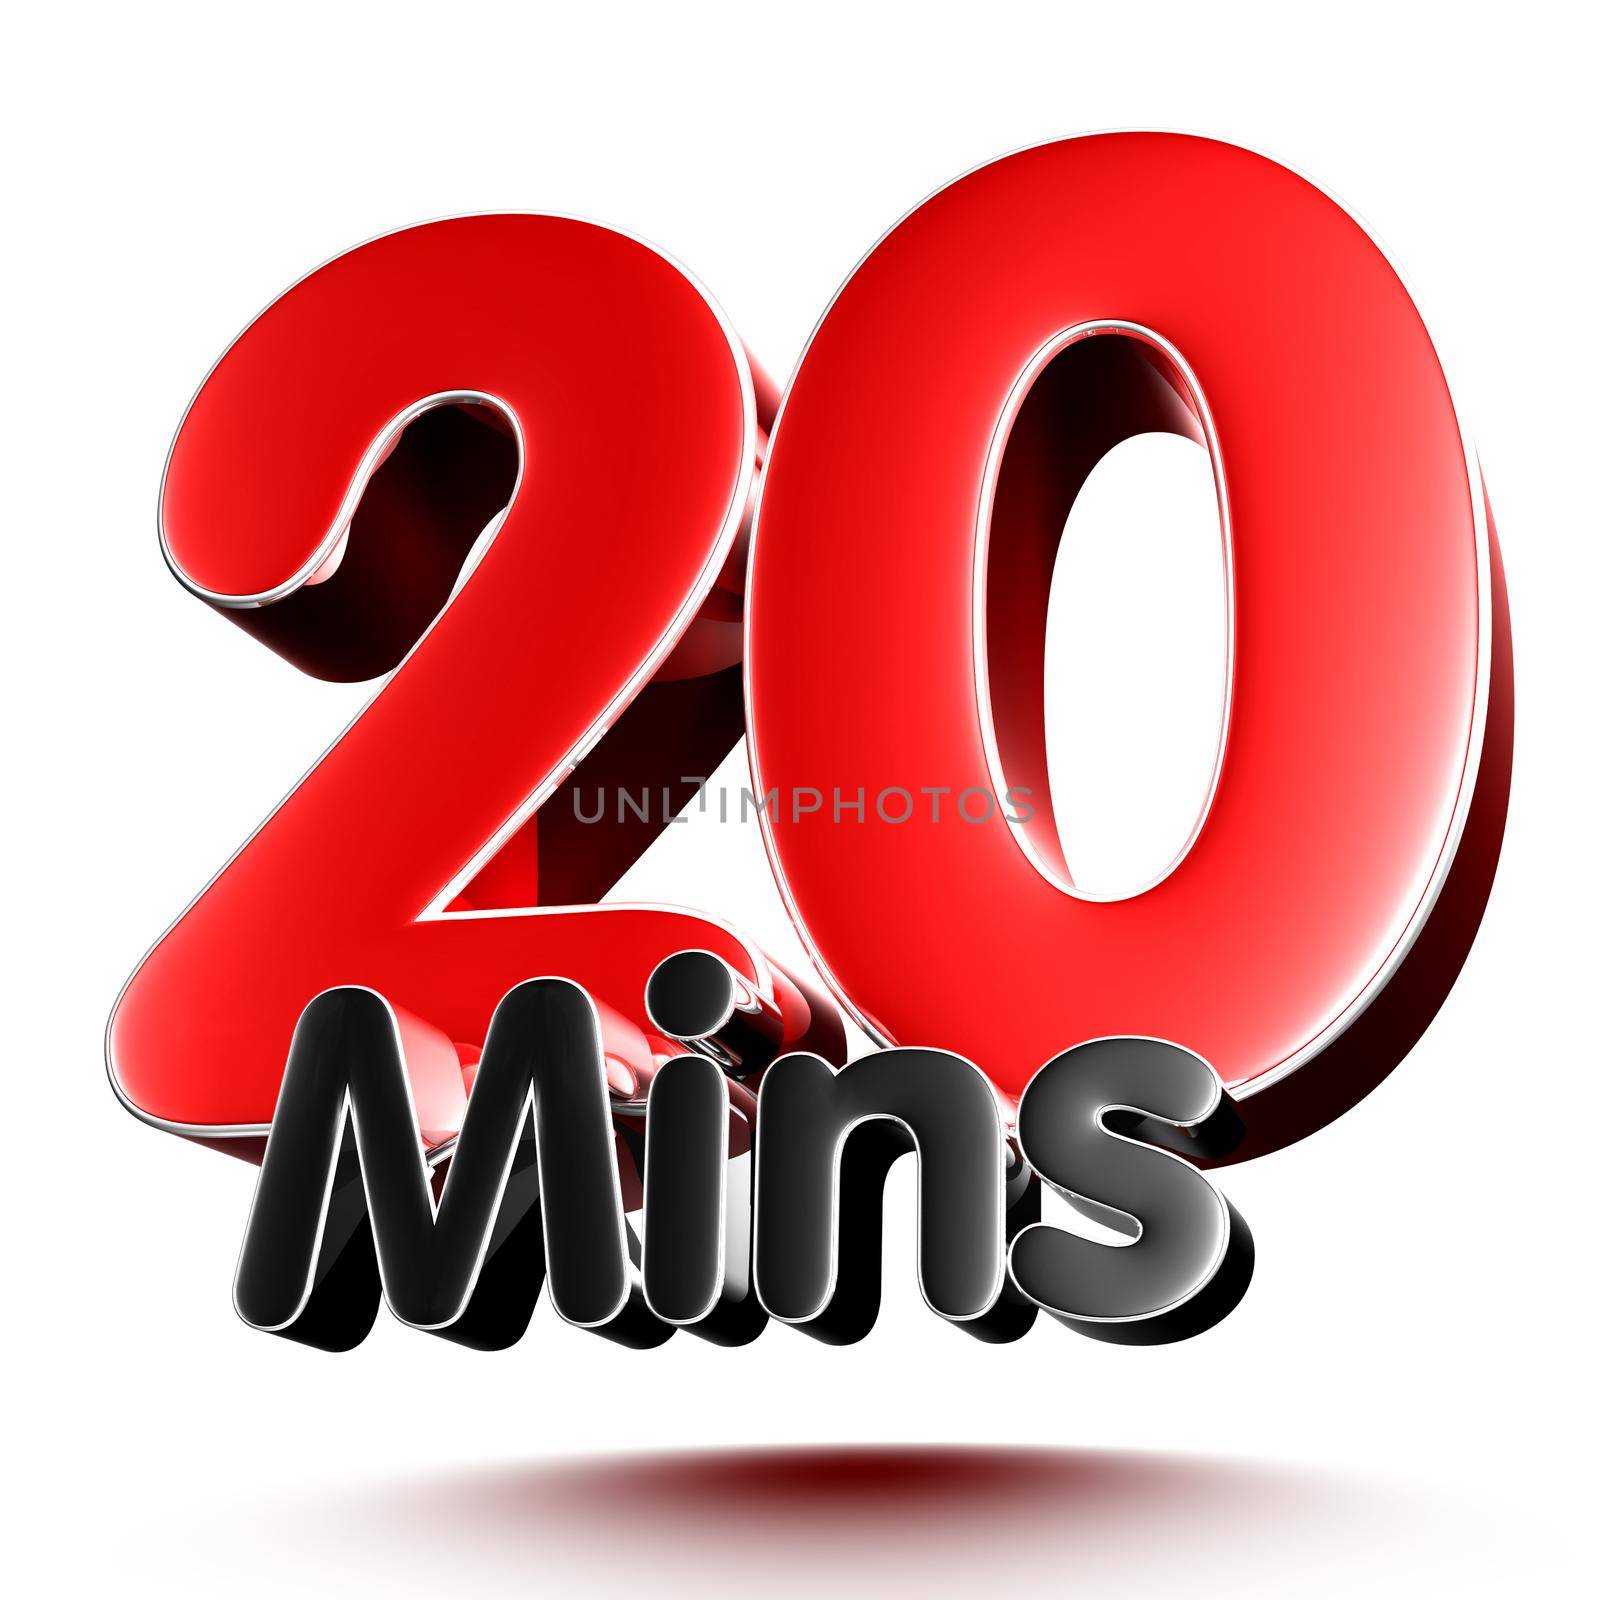 20 mins isolated on white background illustration 3D rendering with clipping path.